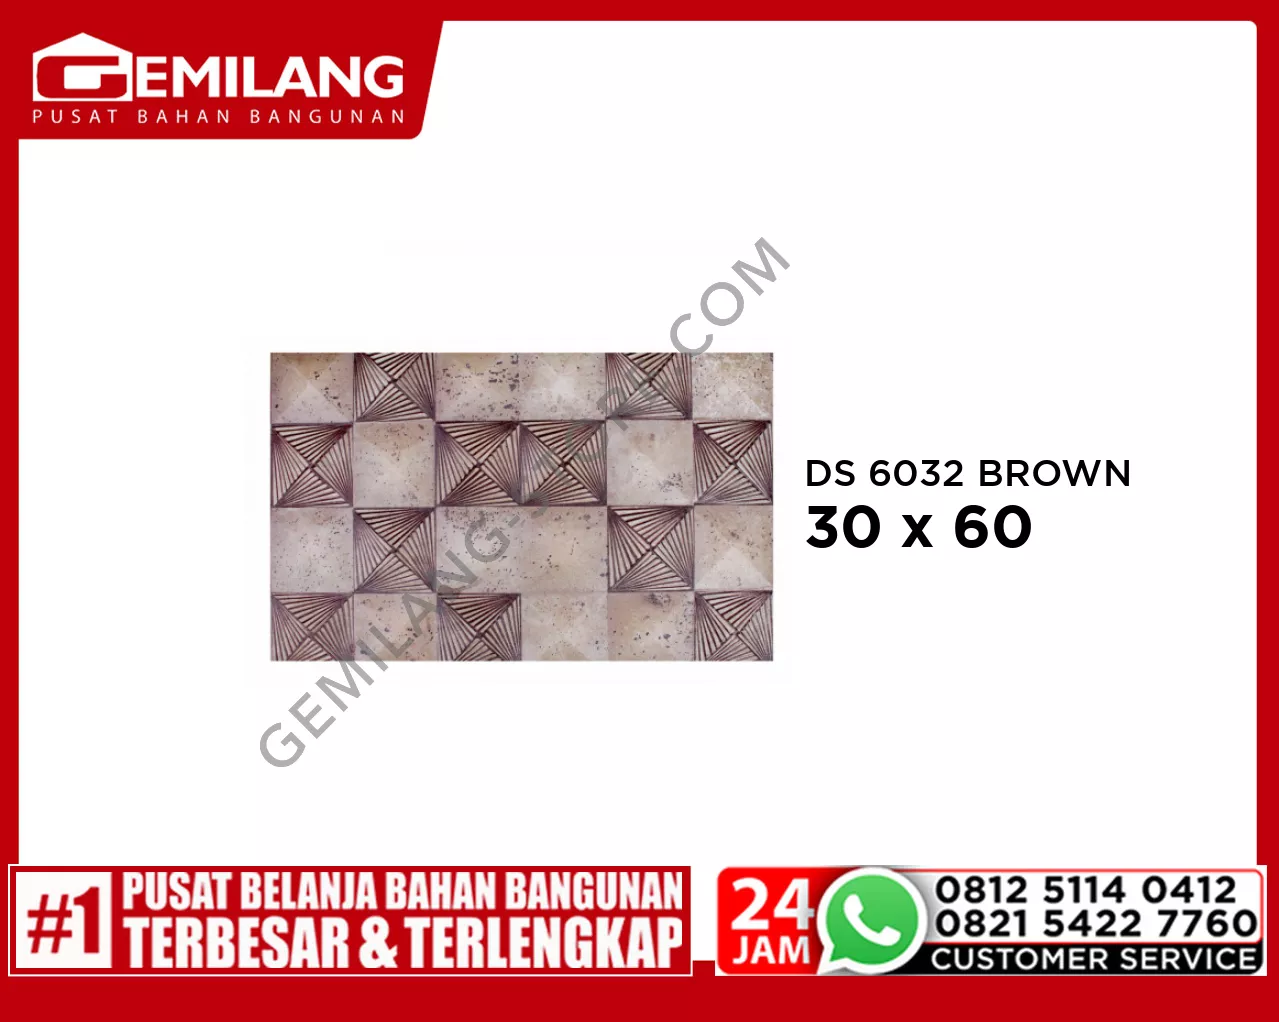 CENTRO DS 6032 BROWN 30 x 60